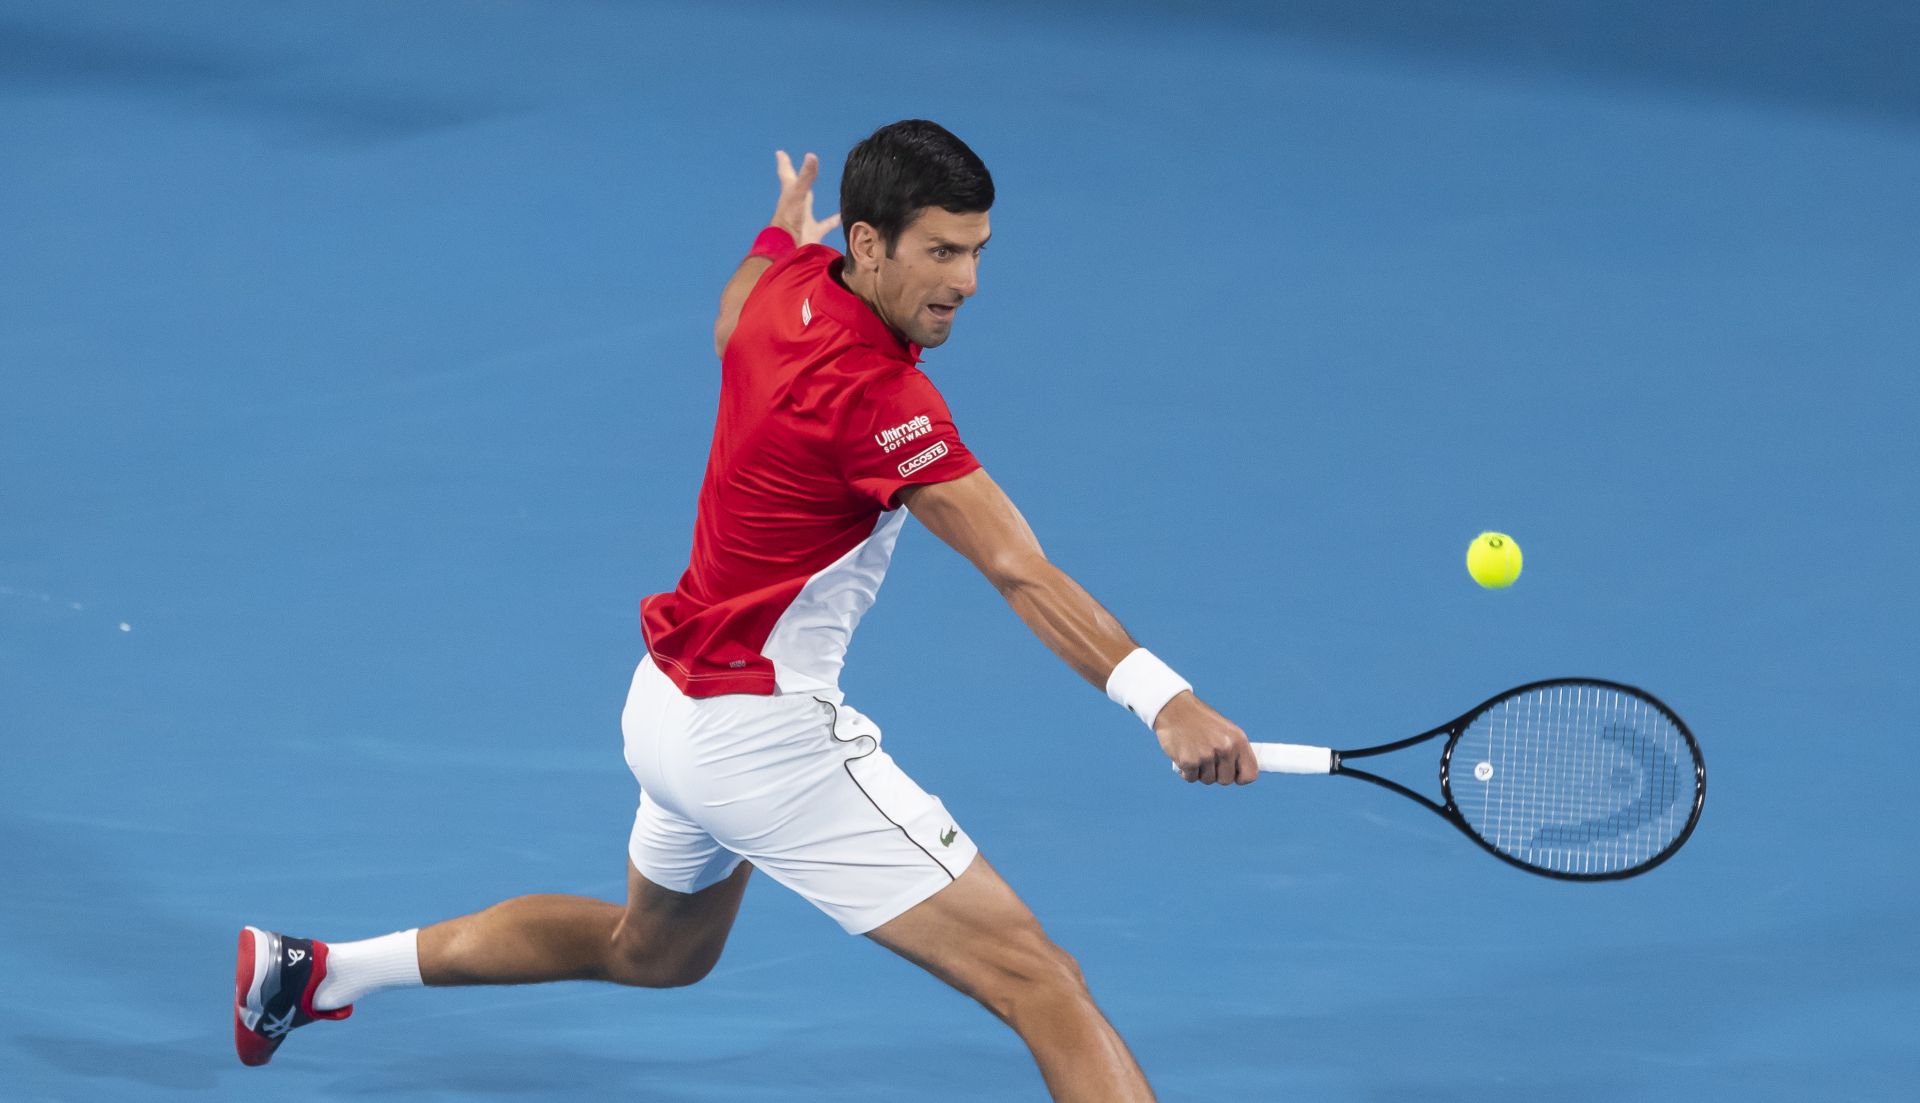 epa08121695 Novak Djokovic of Serbia in action against Rafael Nadal of Spain during the final match on day 10 of the ATP Cup tennis tournament at Ken Rosewall Arena in Sydney, Australia, 12 January 2020.  EPA/CRAIG GOLDING EDITORIAL USE ONLY AUSTRALIA AND NEW ZEALAND OUT